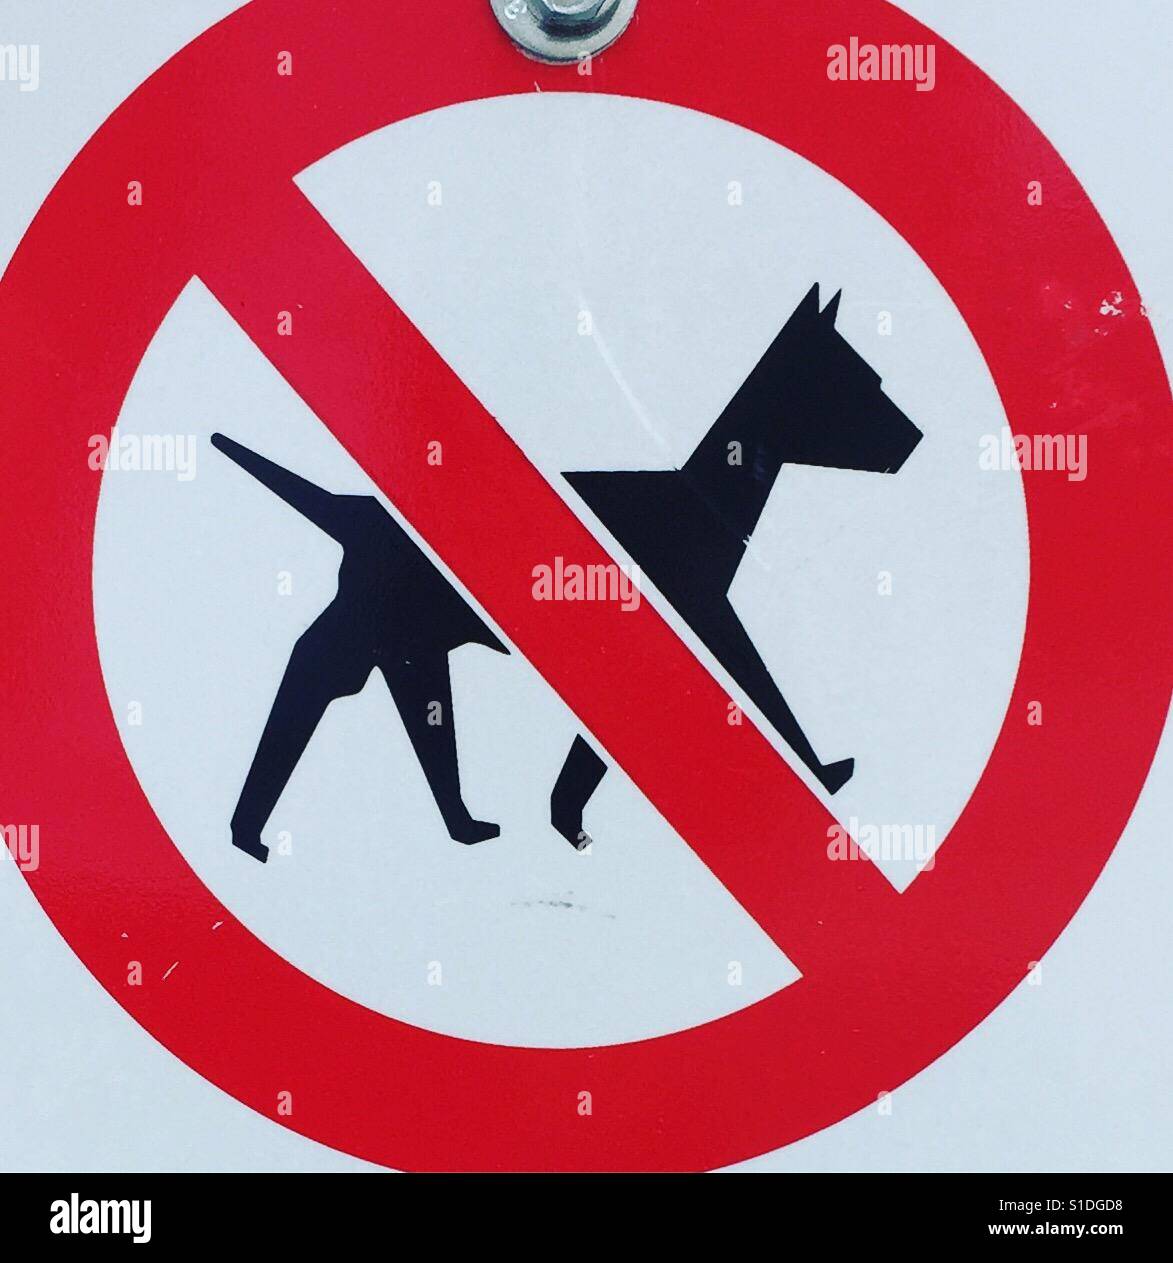 No dogs by K.R. Stock Photo